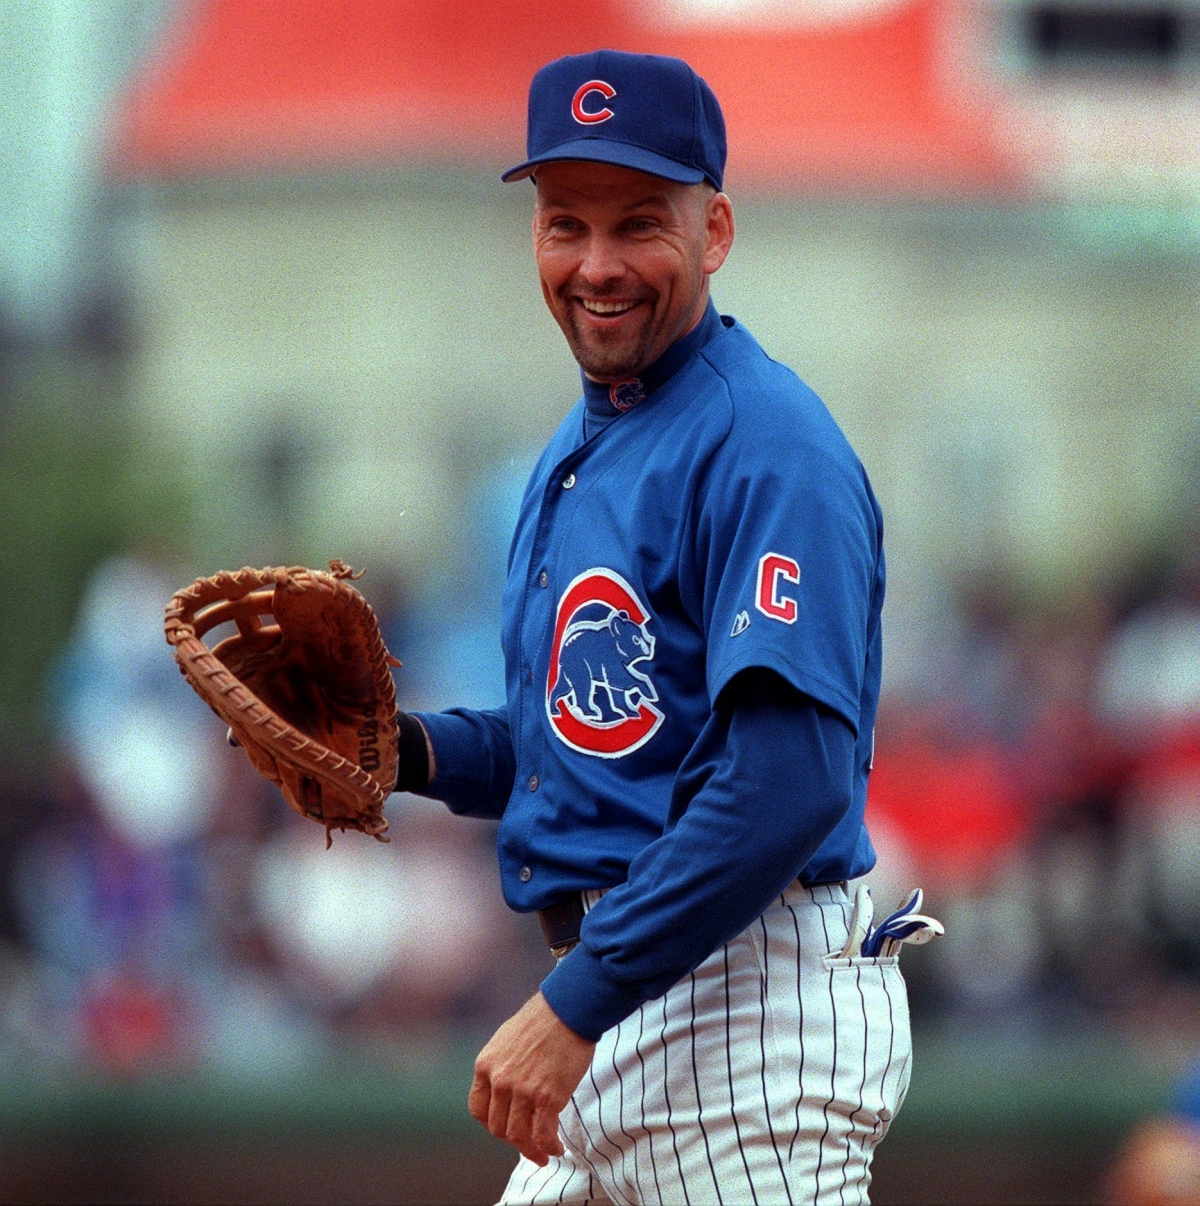 Mark Grace is not in the Hall of Fame. Why is this? - Quora